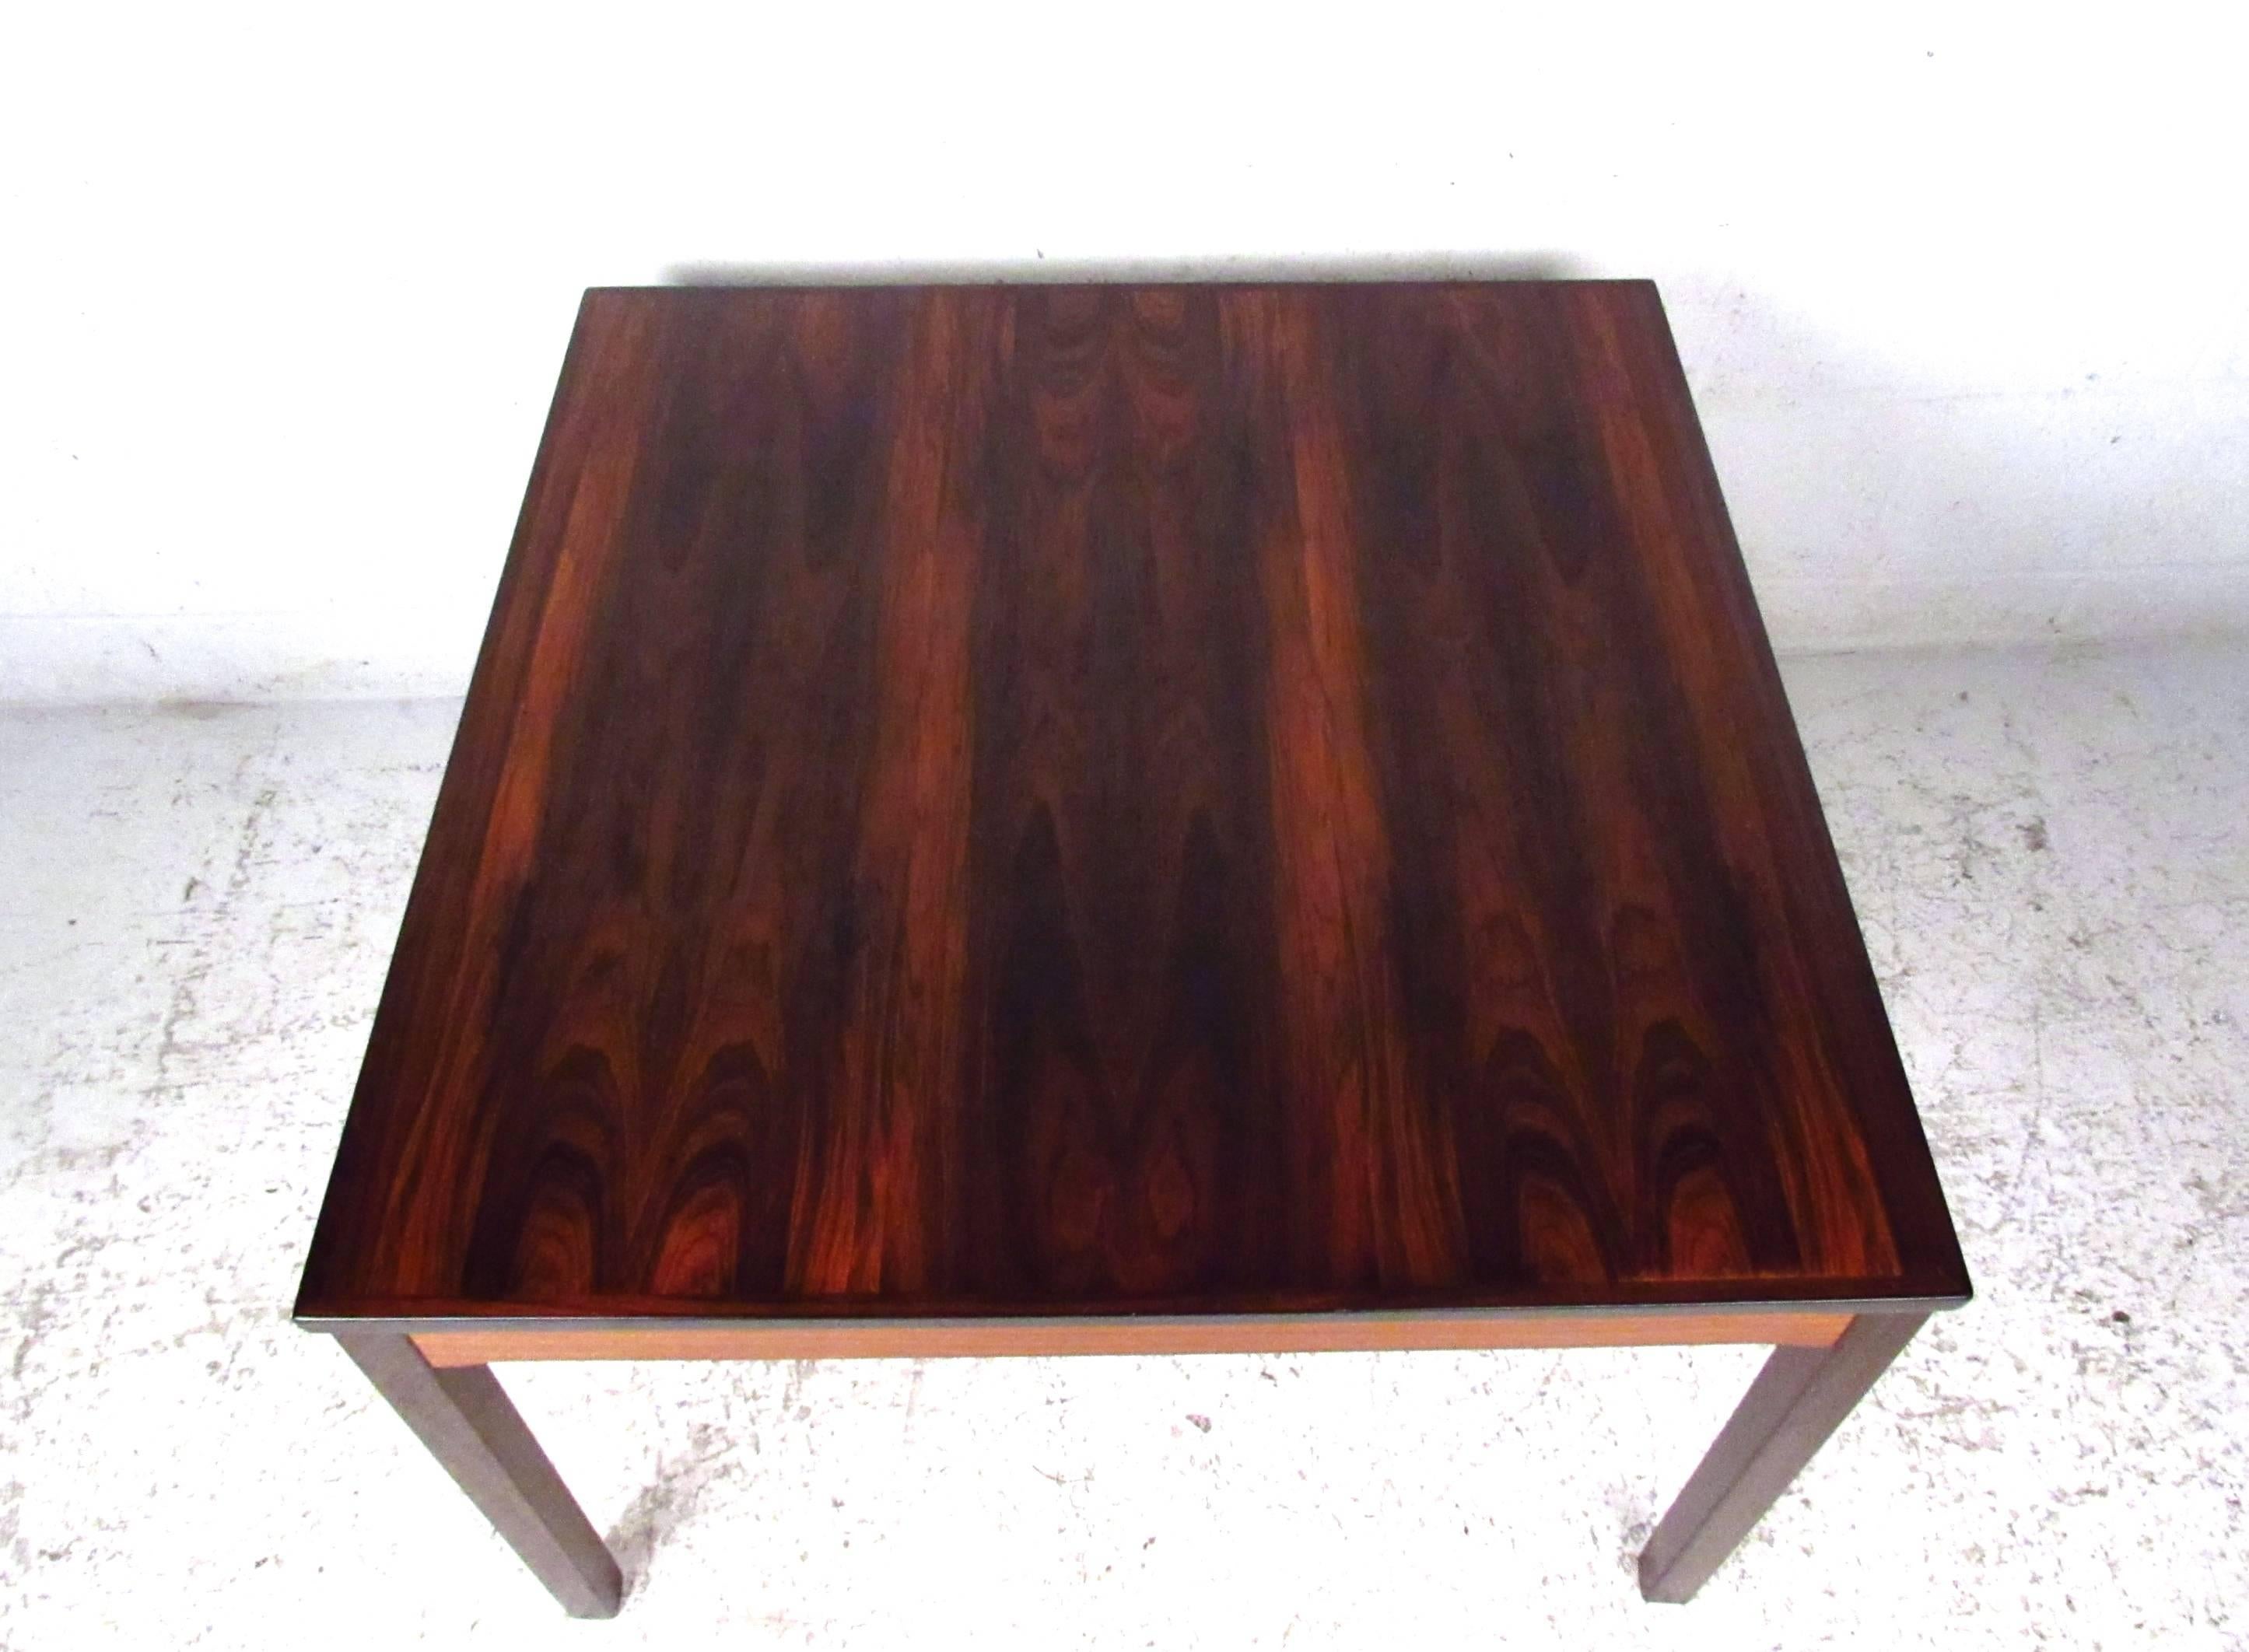 This Norwegian rosewood coffee table by Bruksbo offers a rich natural rosewood finish, with wonderfully banded lightened side supports. Quality midcentury construction makes this vintage table a unique addition to any interior. Please confirm item